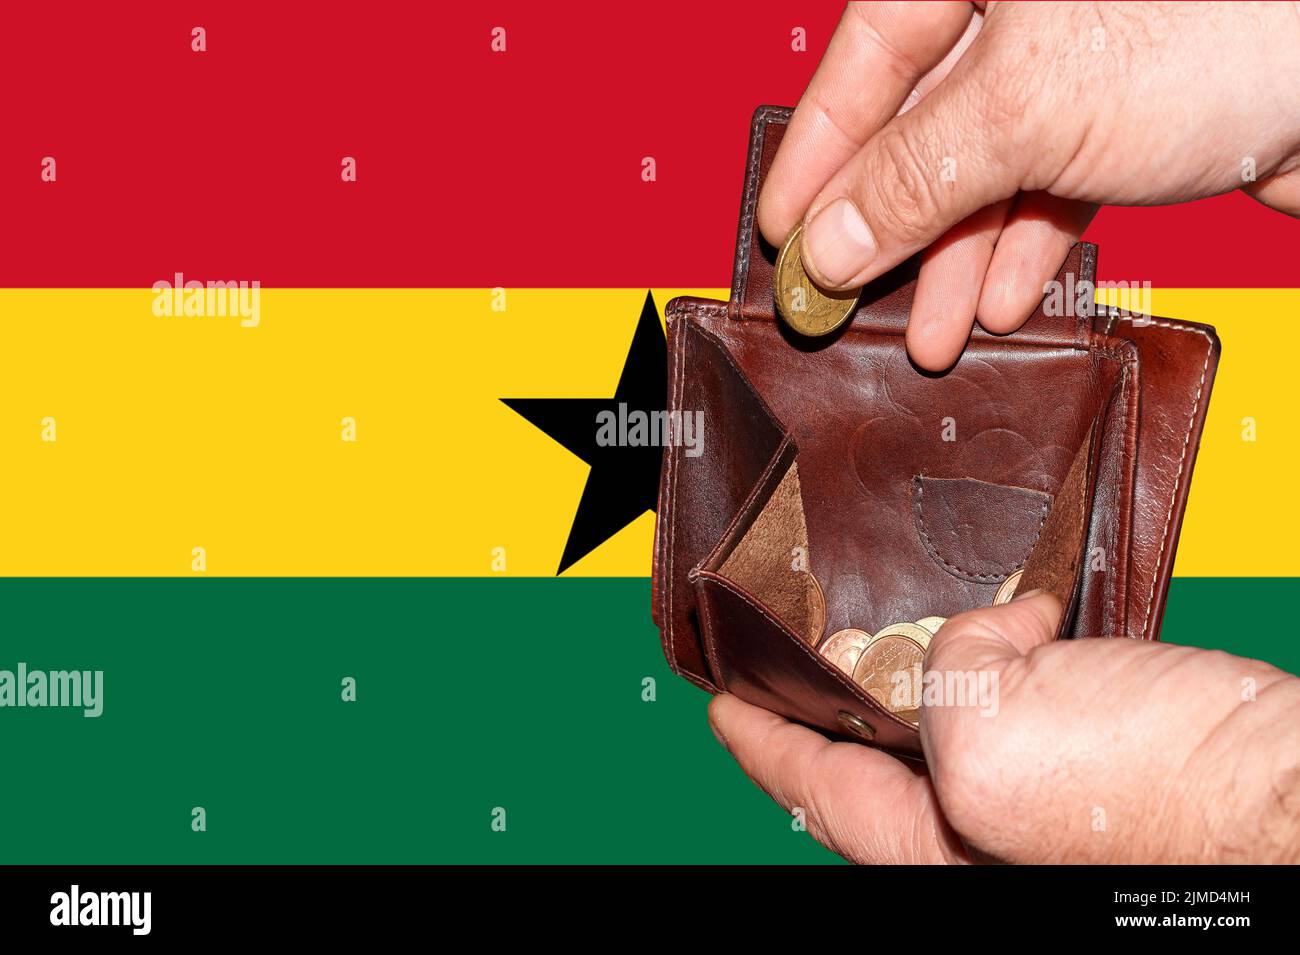 Empty wallet shows the global financial economic crisis triggered by the corona virus in Ghana Stock Photo